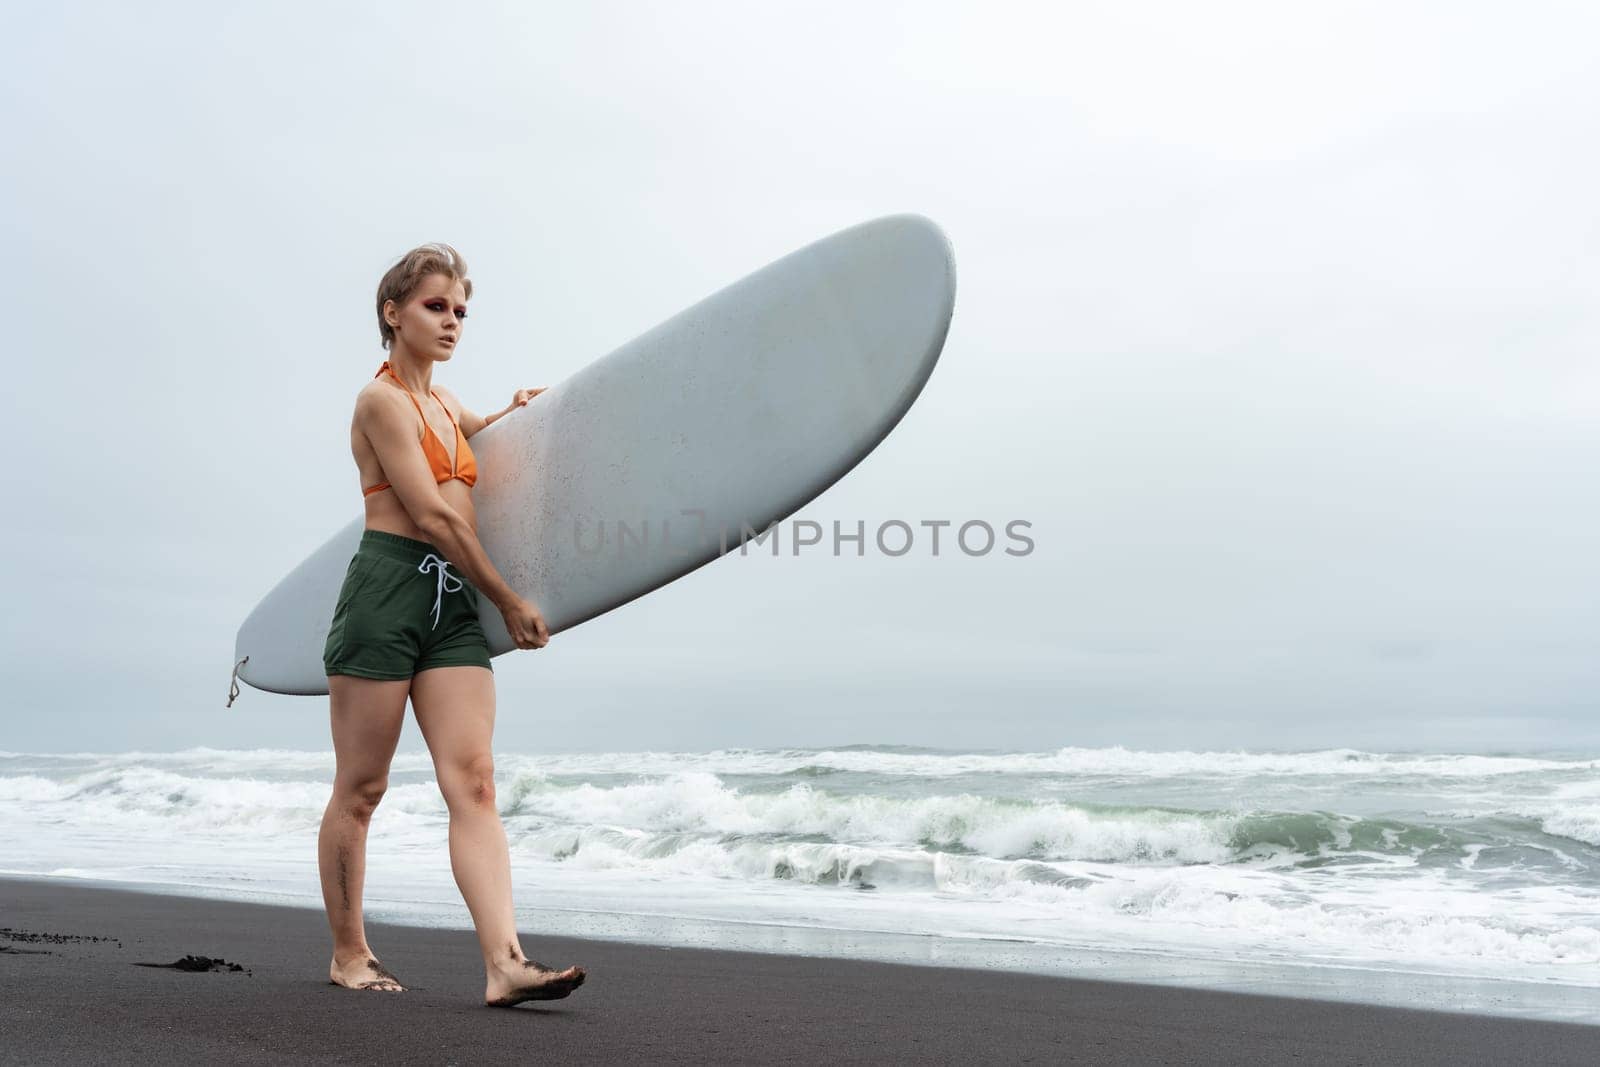 Woman surfer walks on black sand beach carrying white surfboard against backdrop of sea waves during summer vacation. Sporting woman in bikini top, shorts and barefoot. Physical activity concept